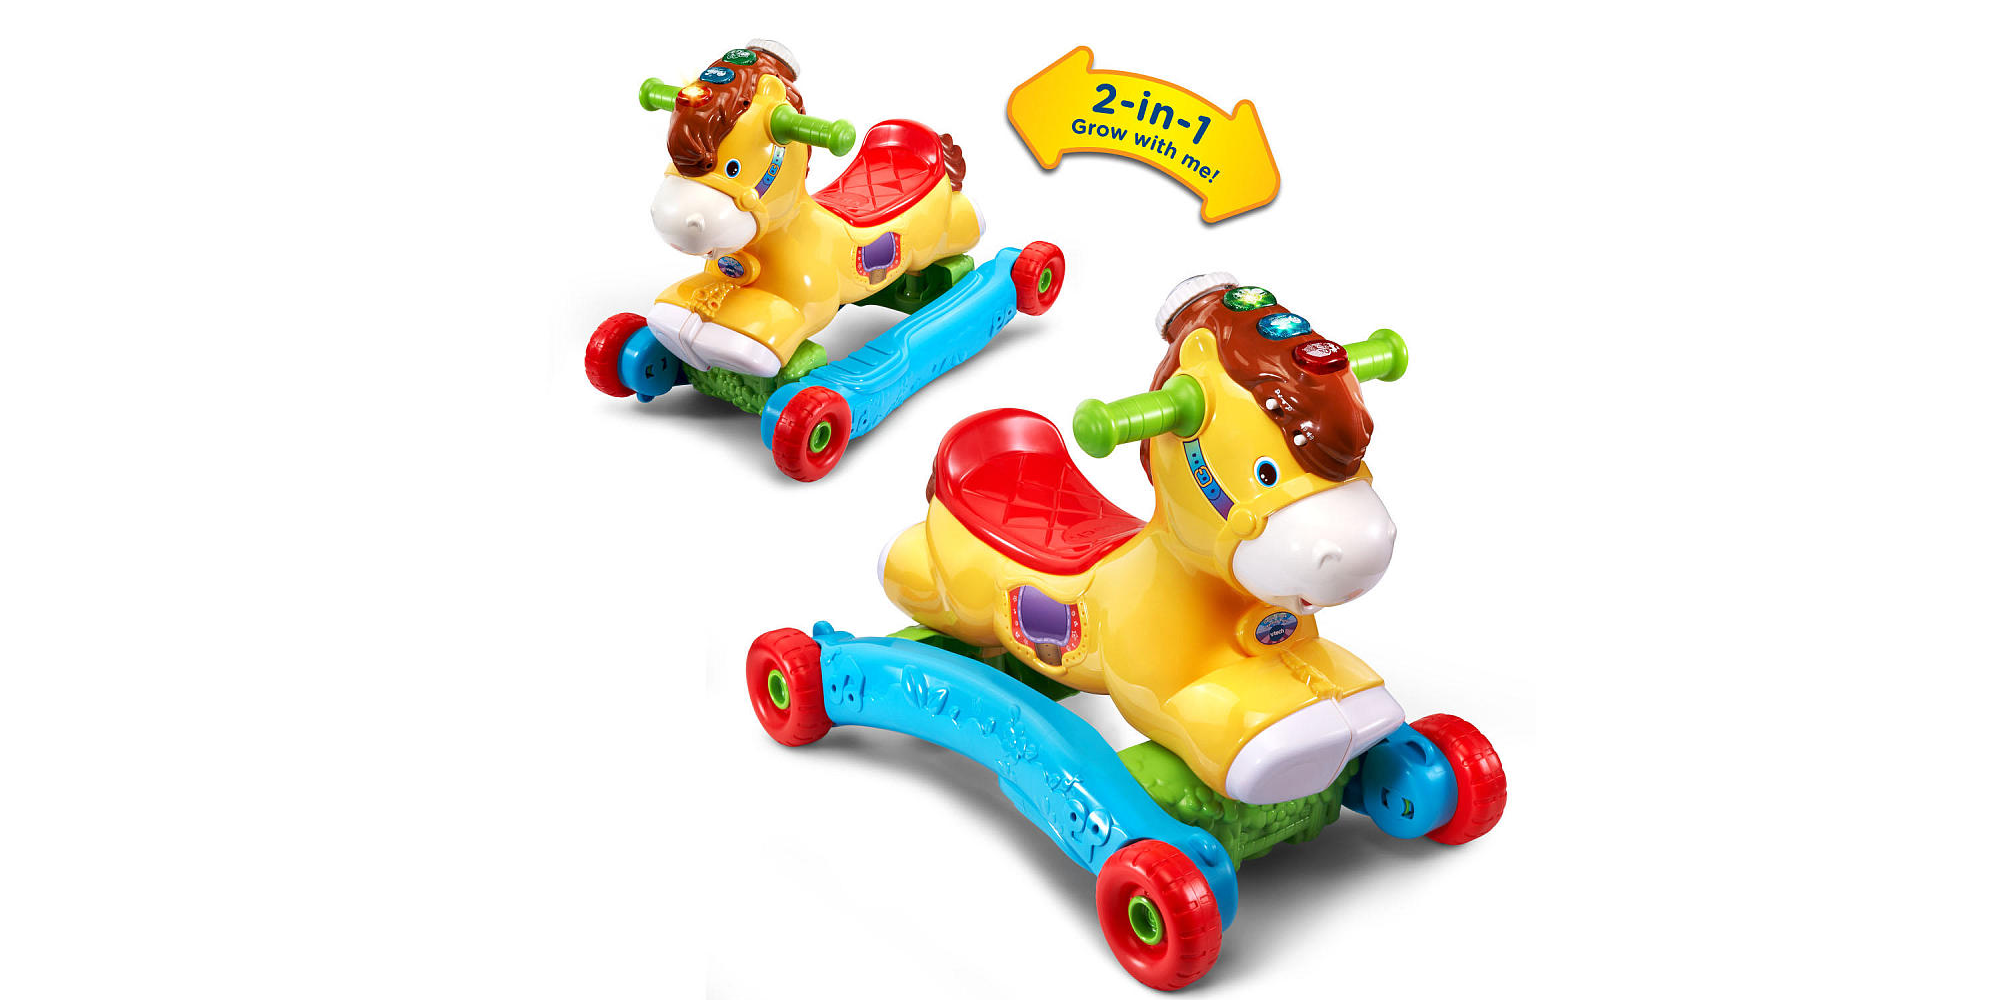 VTech Gallop & Rock Learning Pony Interactive Ride-On Toy 50% Off!! Now Just $19.98!